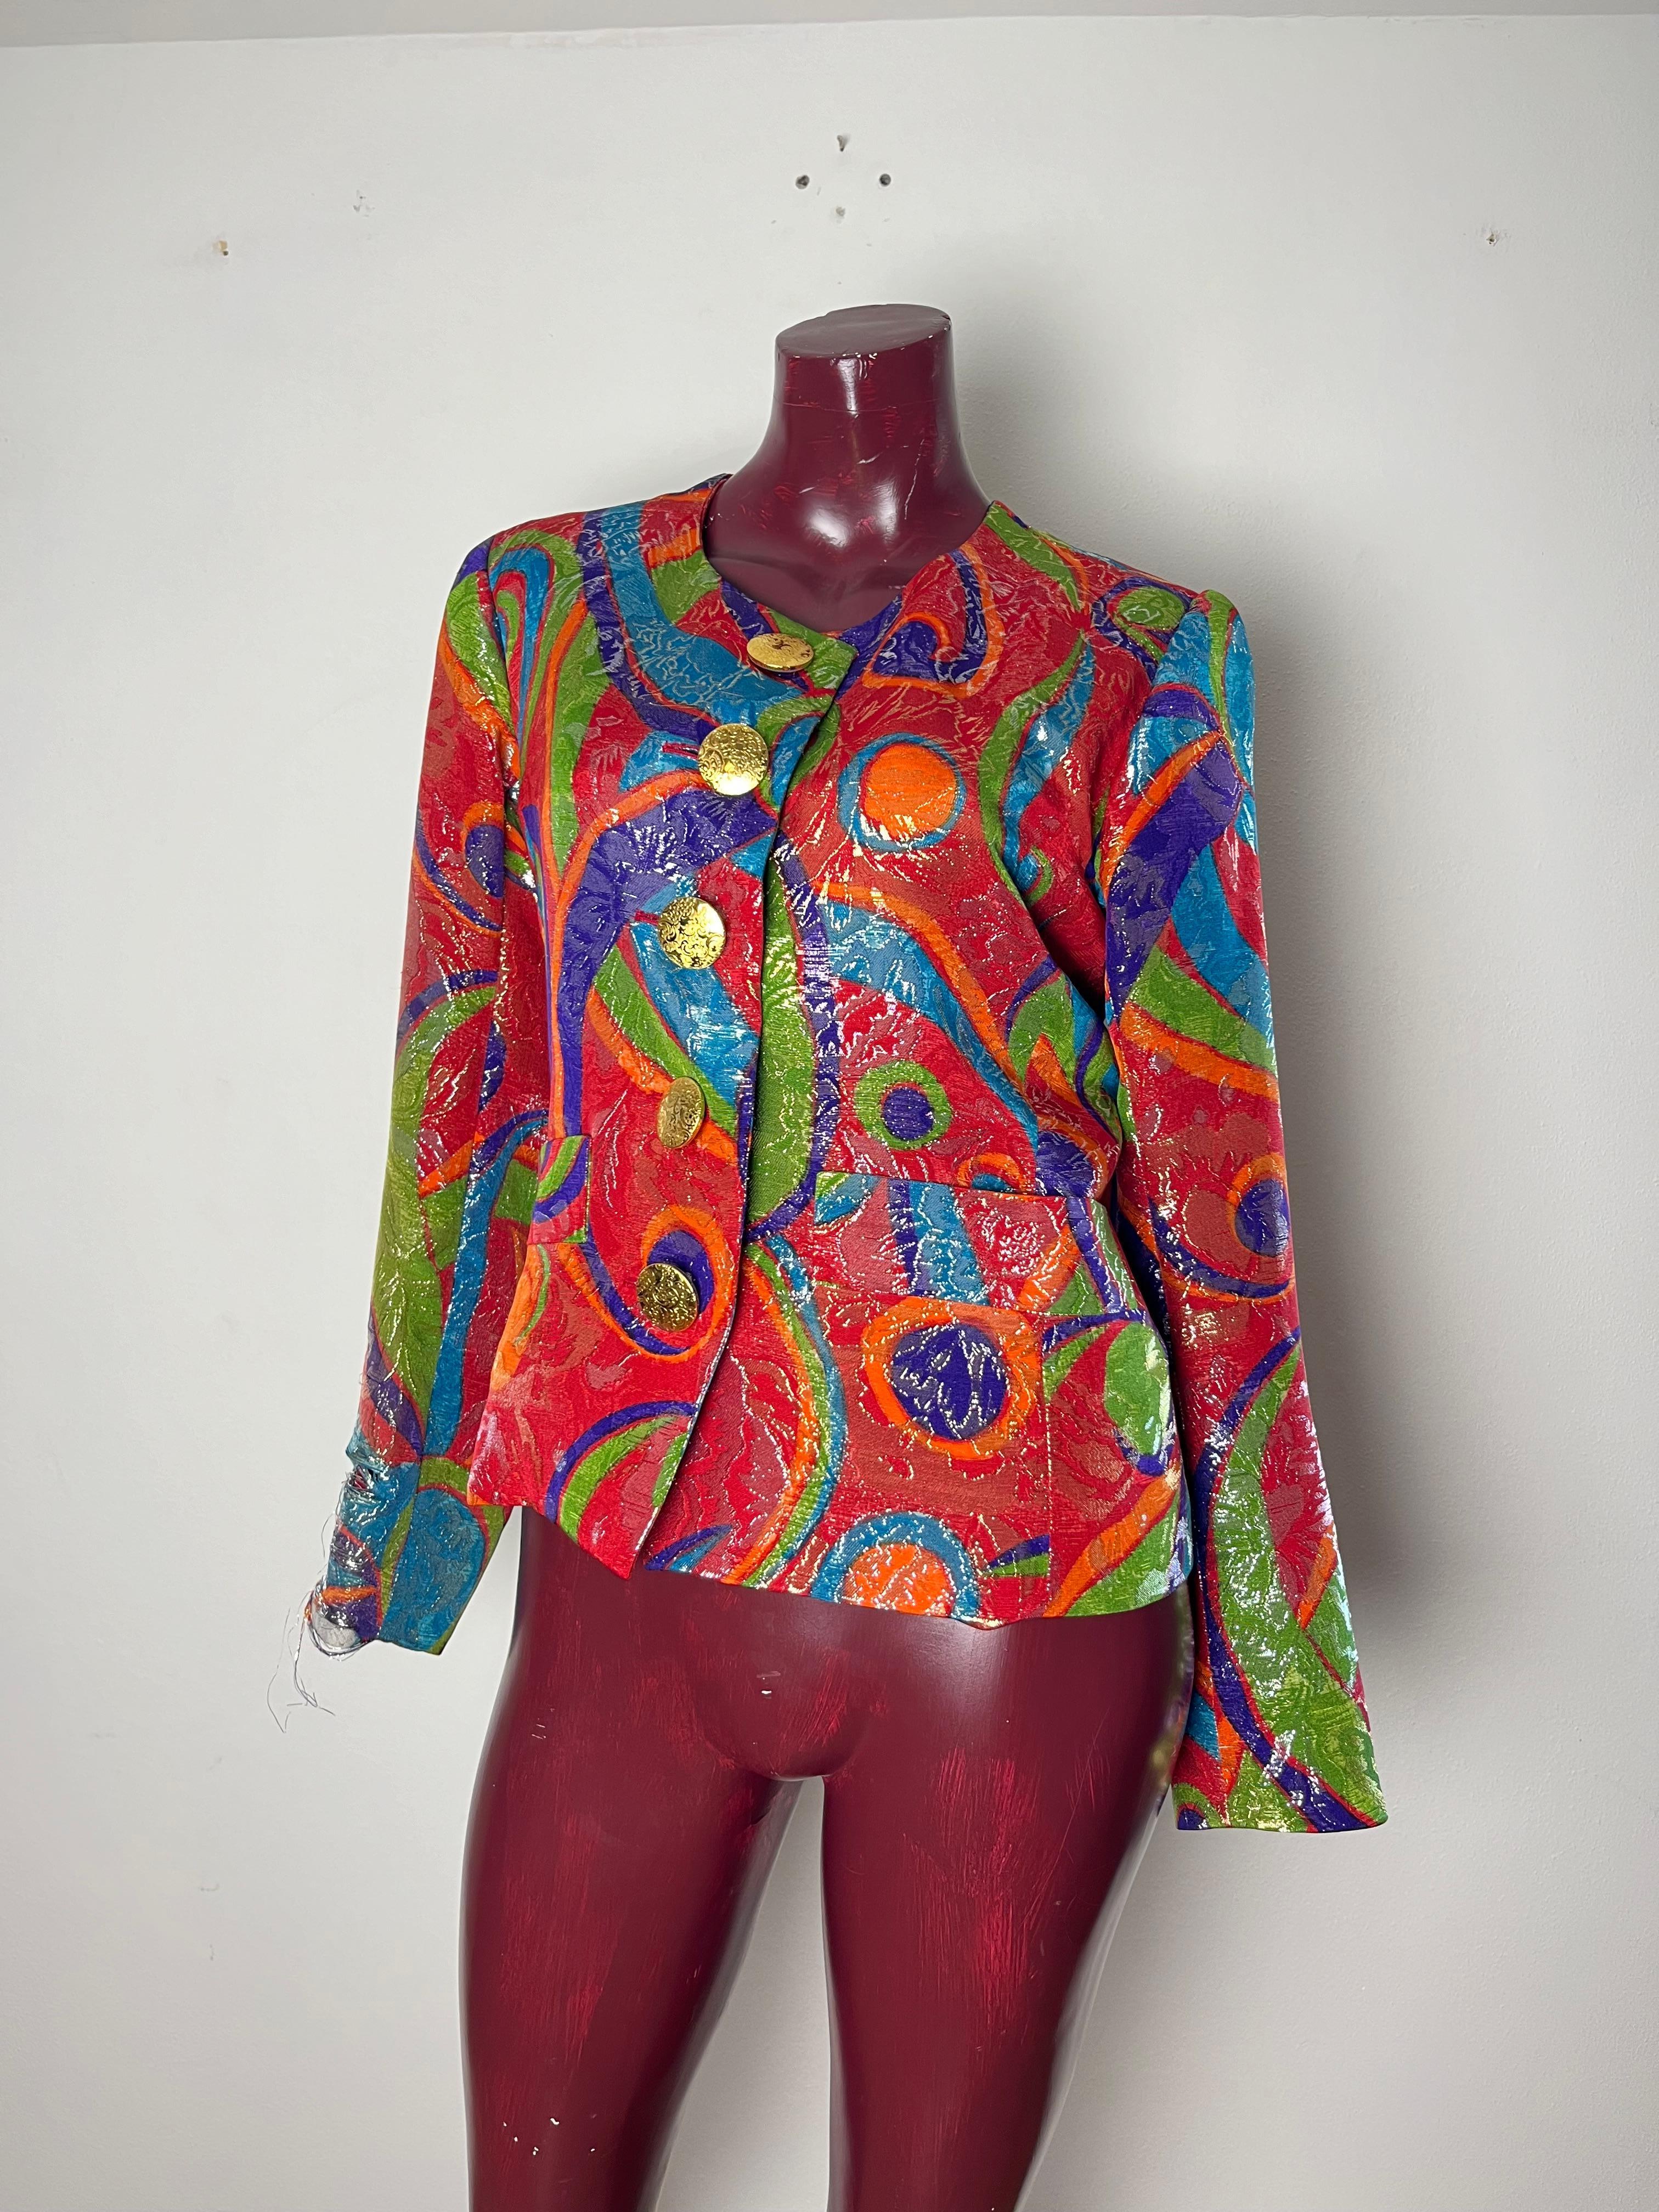 Evening multicolor brocade single breasted jacket.  1980s Fabric composition: 51% wool, 34% silk, 15% wire. Red silk lining. Gold metal buttons on the front and 5 buttons on each sleeve
we sell at a discounted price as it has a fairly major defect